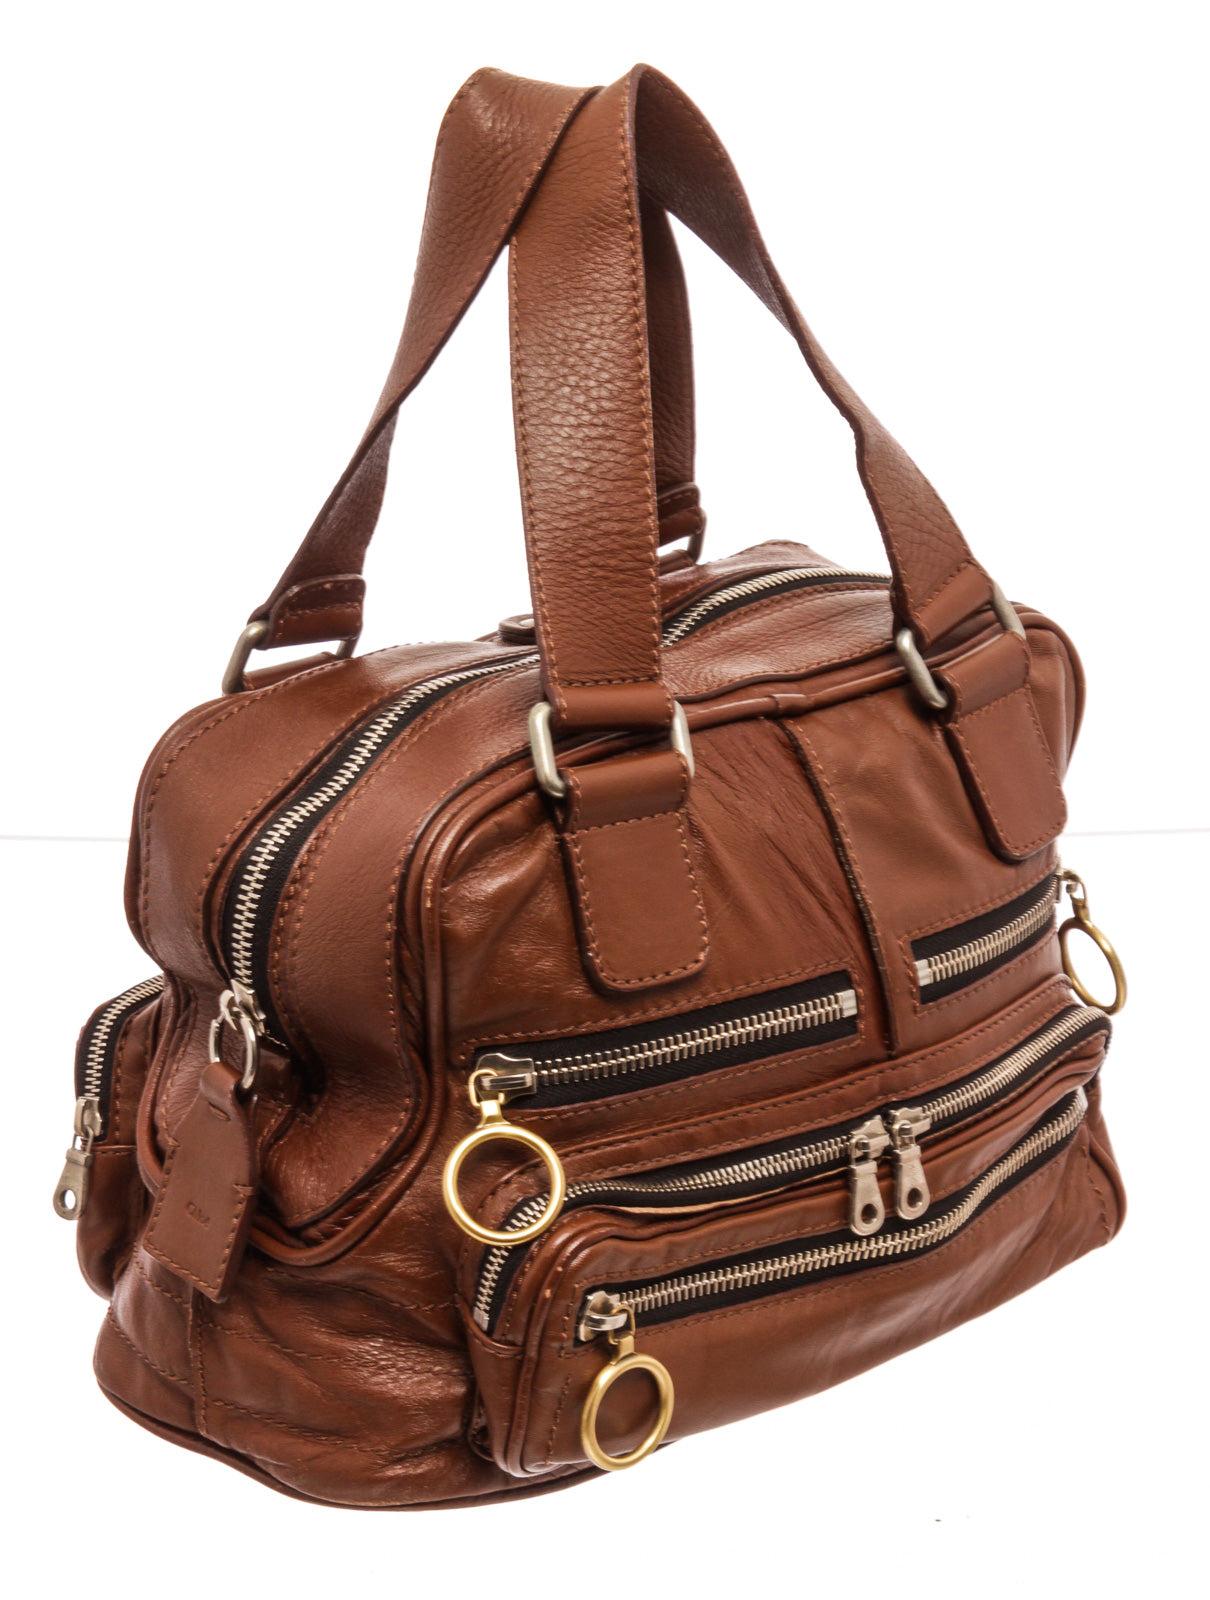 Chloe Brown Leather Betty Shoulder Bag with gold-tone hardware, rbrown leather, dual shoulder straps, five exterior pockets, canvas lining & single interior pocket, zip closure.
33180MSC